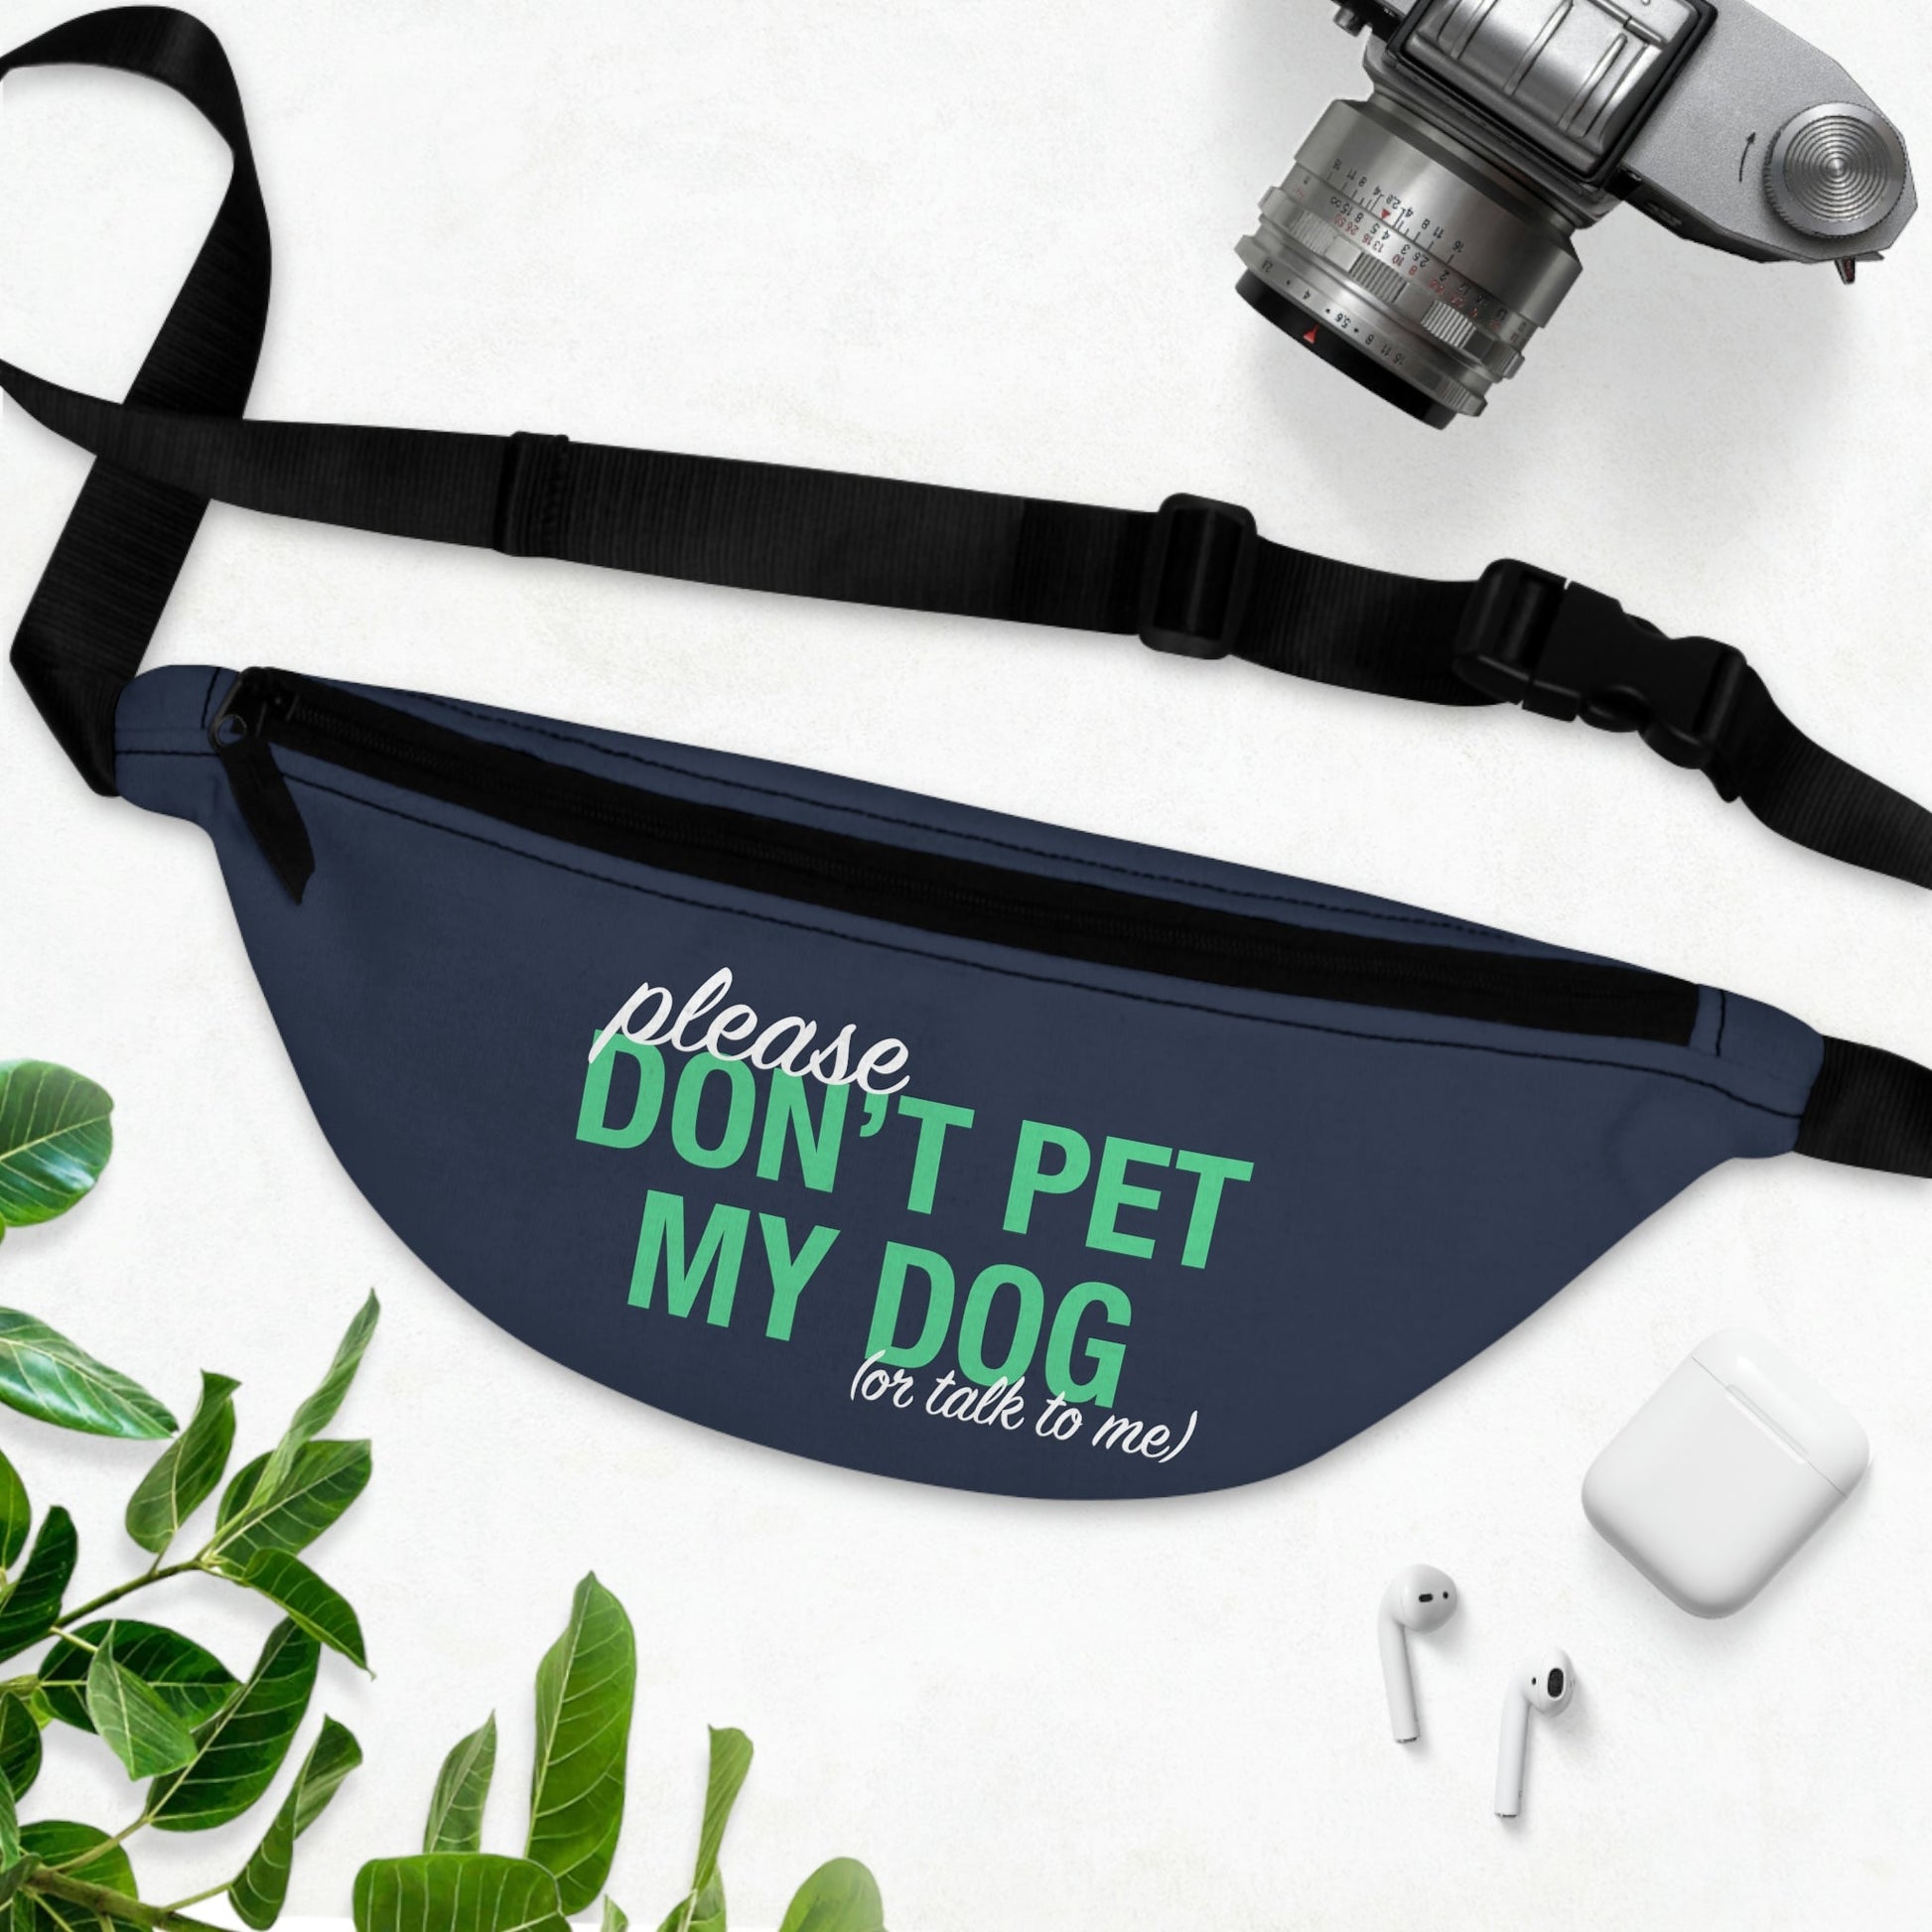 Please Don't Pet My Dog (Or Talk To Me) | Treat Pouch - Detezi Designs-11669688796807011072